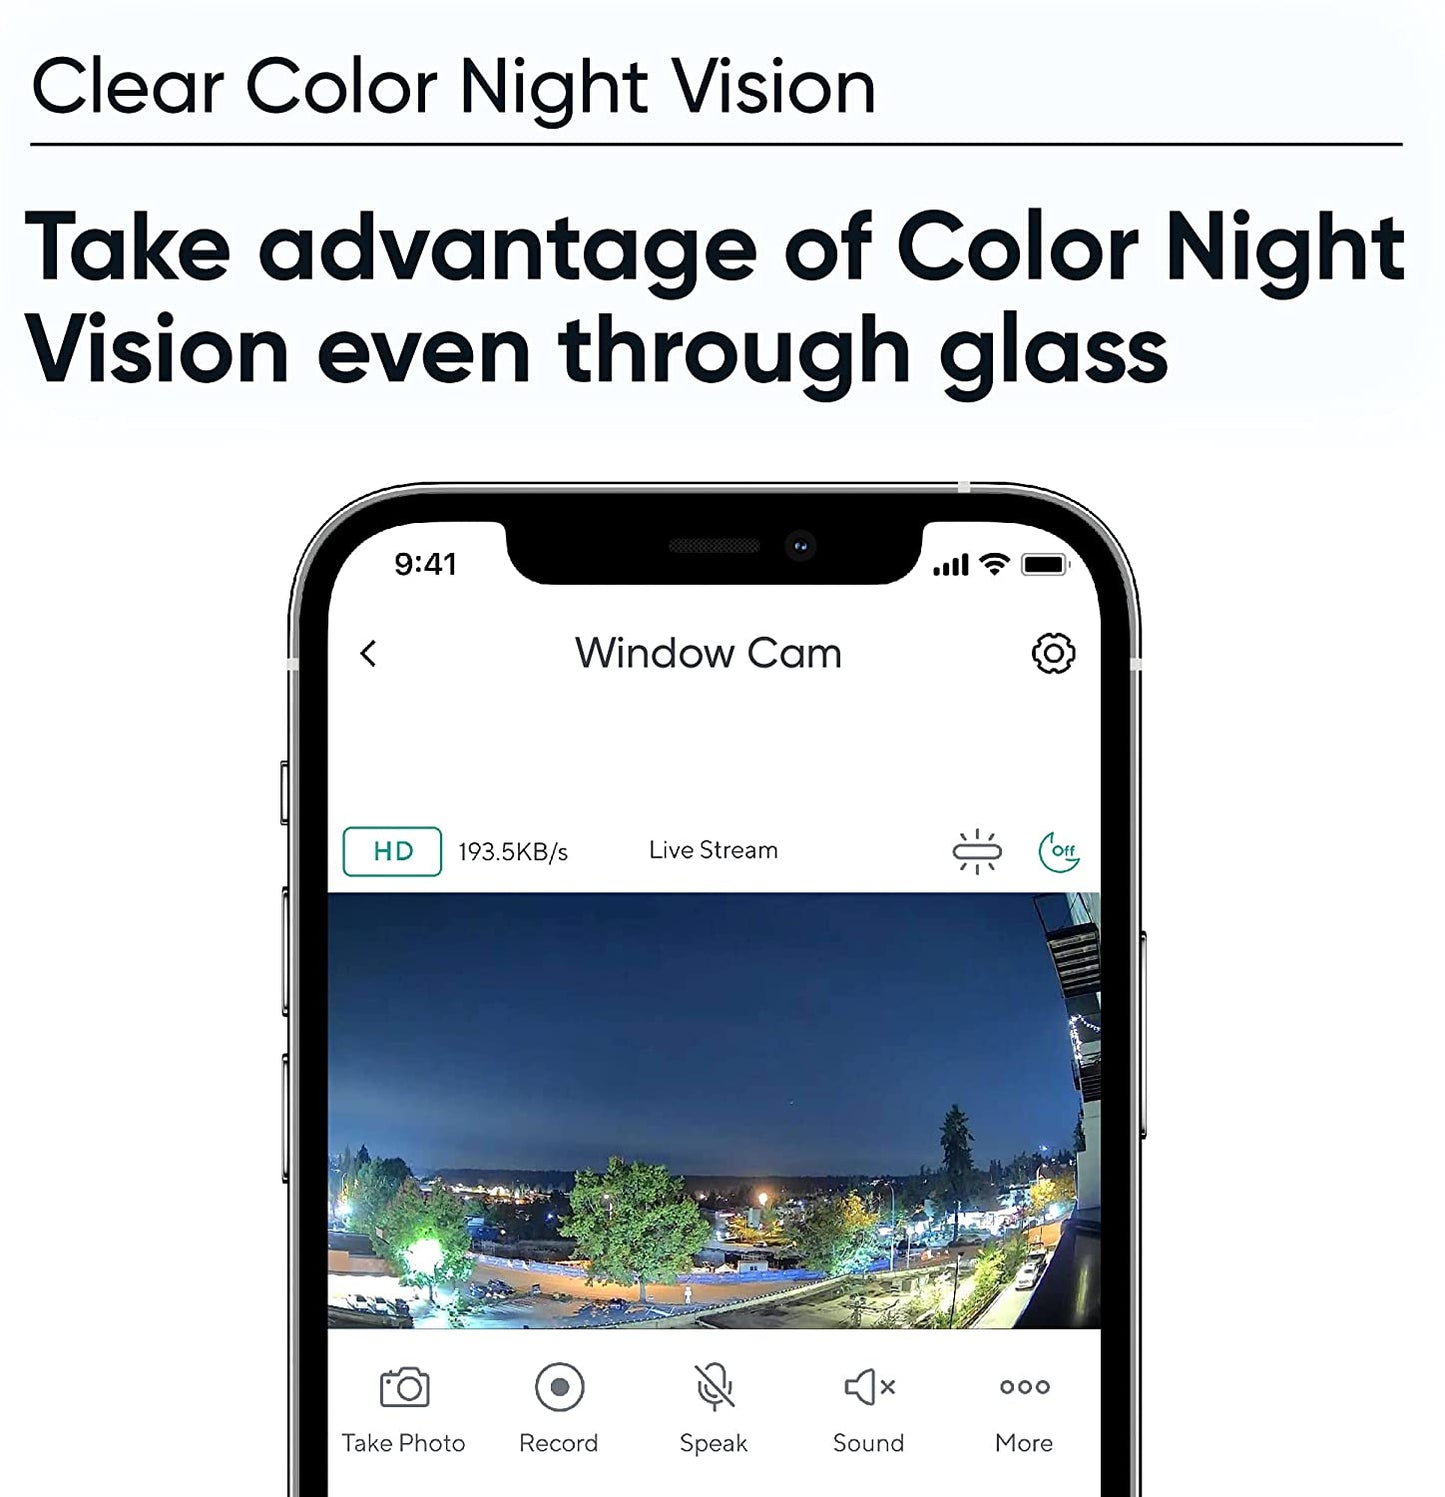 Smartphone camera with the live stream of a camera called Window Cam. Text overlay that says "Clear Color Night Vision."